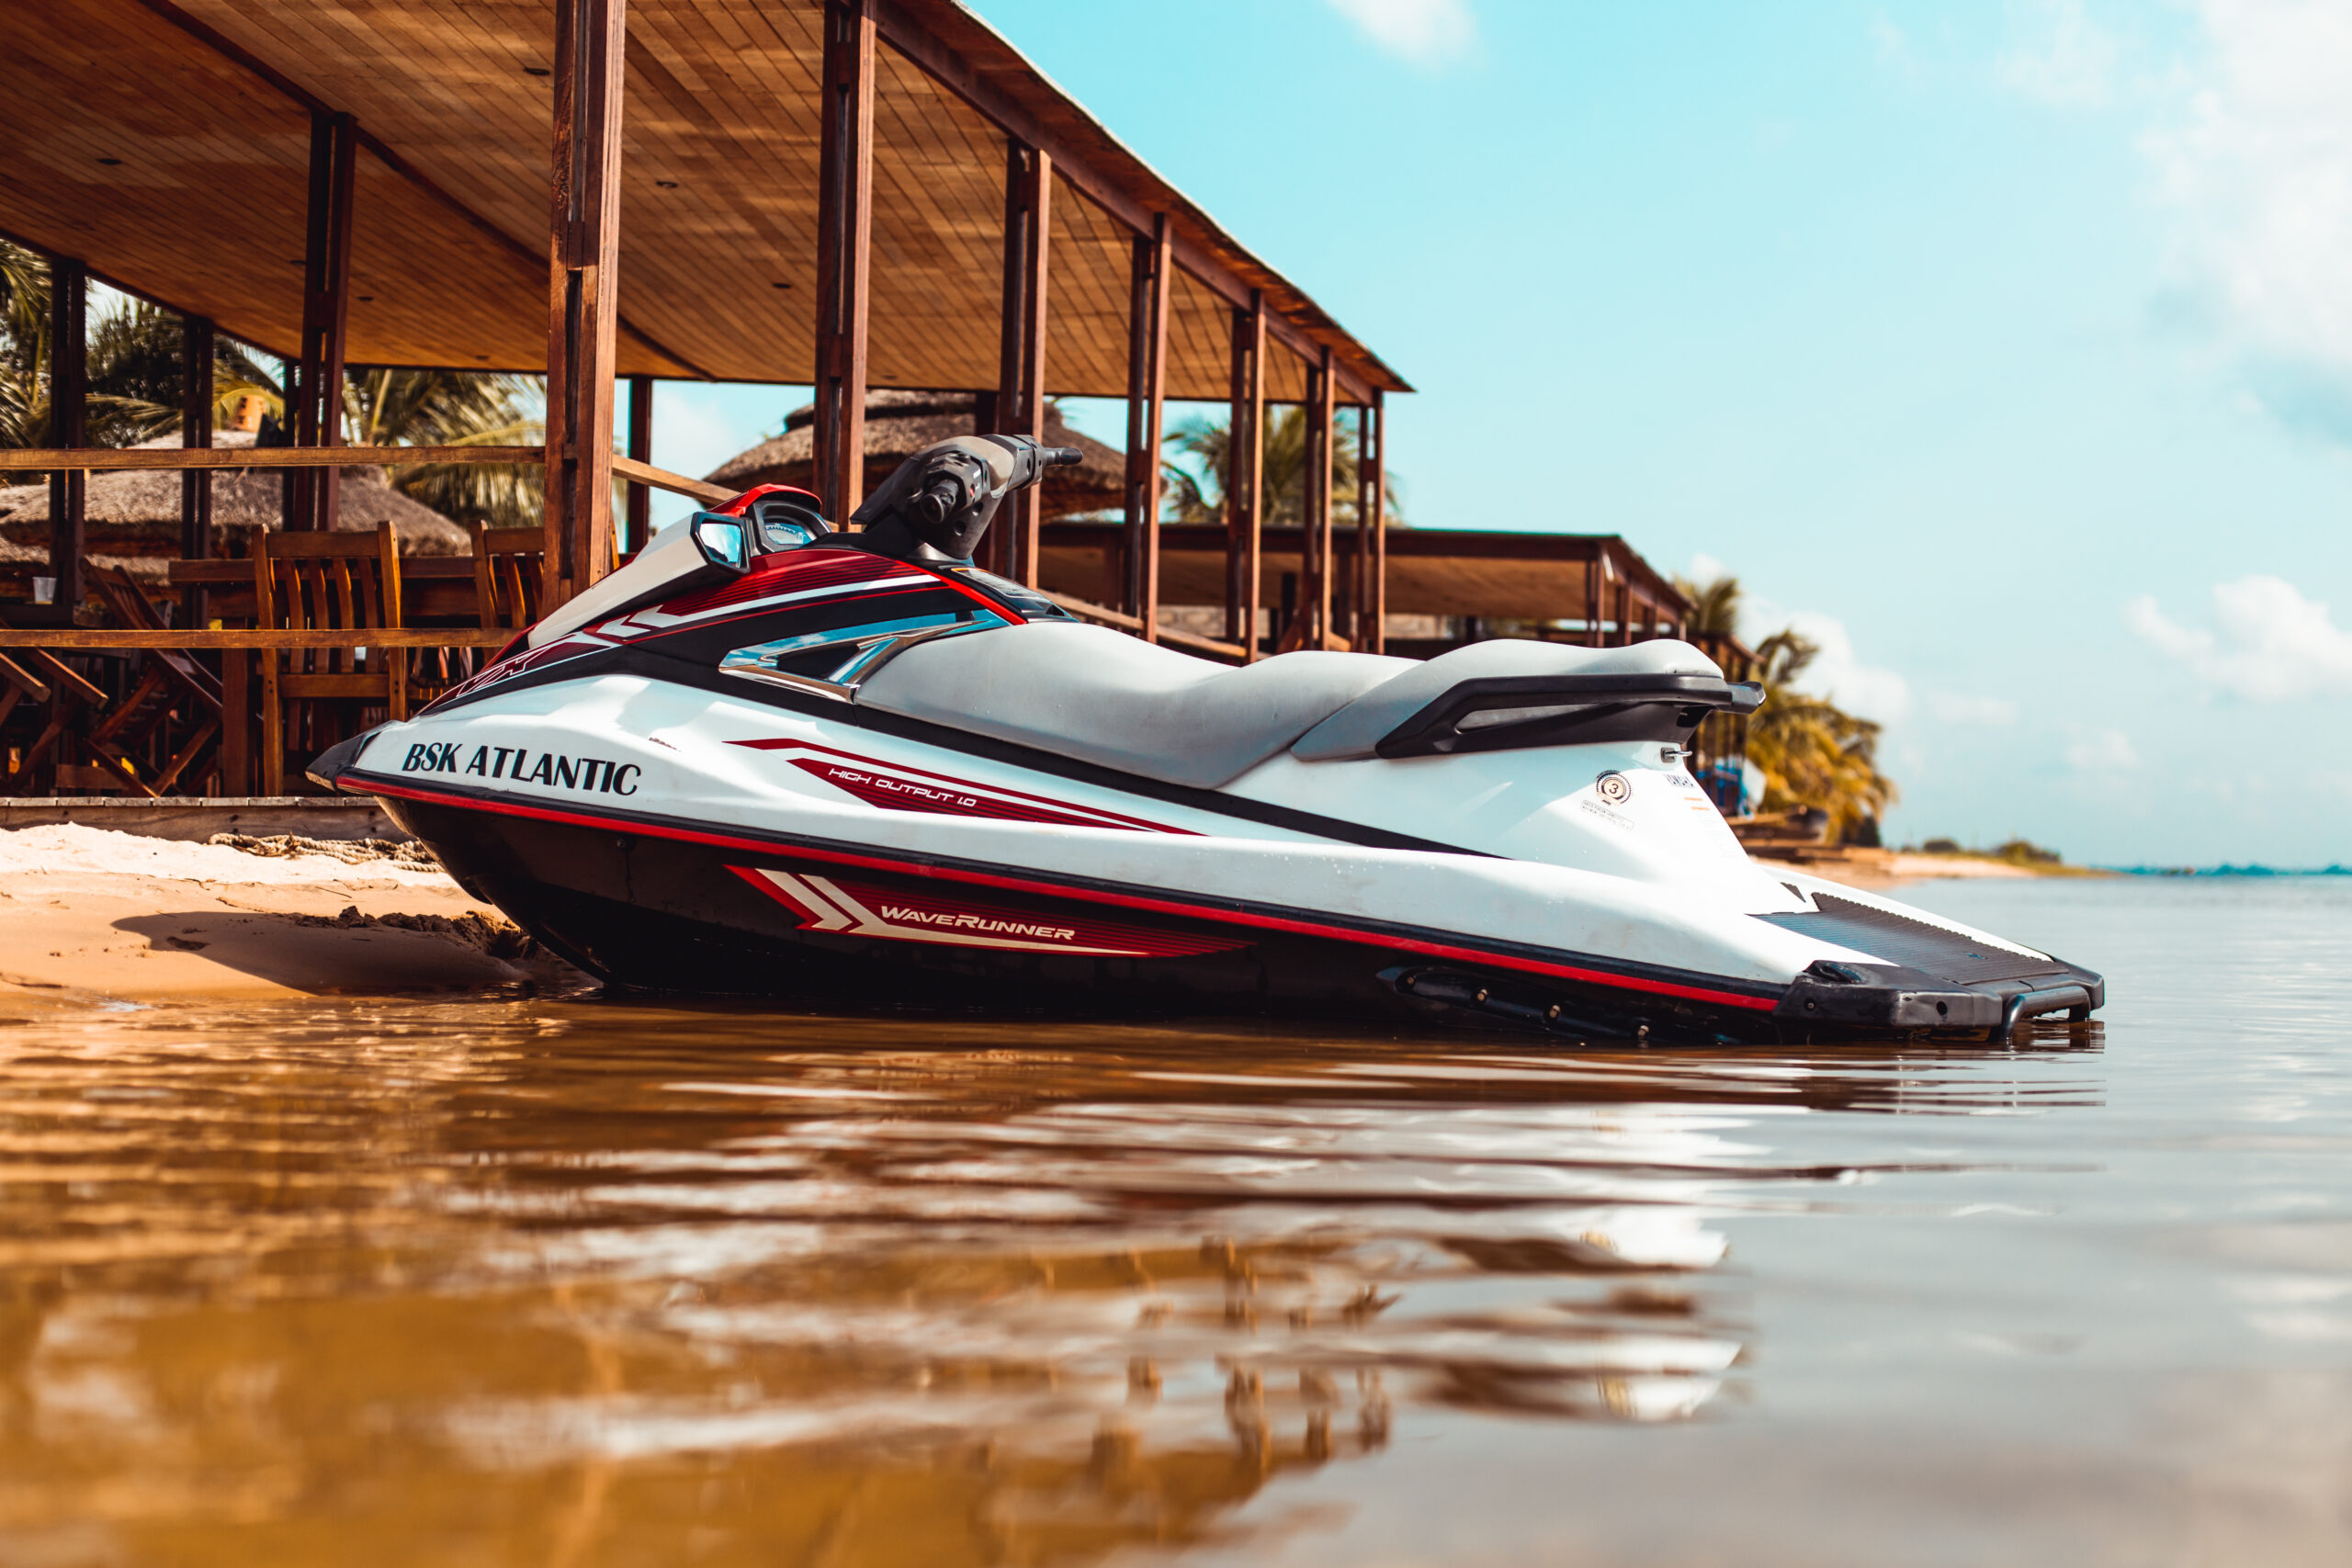 Maximizing Fun and Minimizing Risks: 7 Expert Tips for First-Time Jet Ski Owners for Commercial Usage